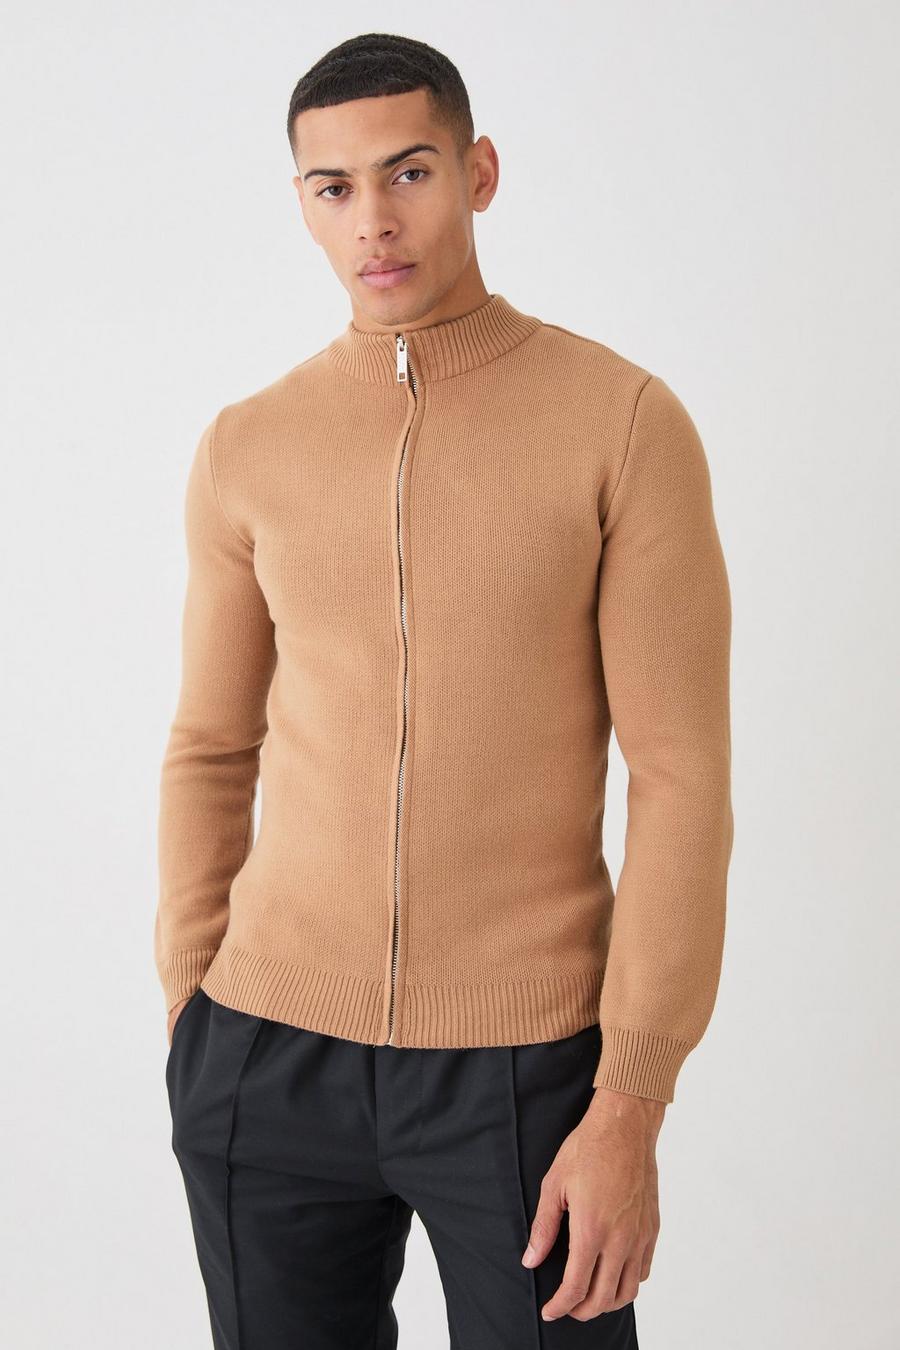 Tan Muscle Fit Zip Through Knitted Jacket